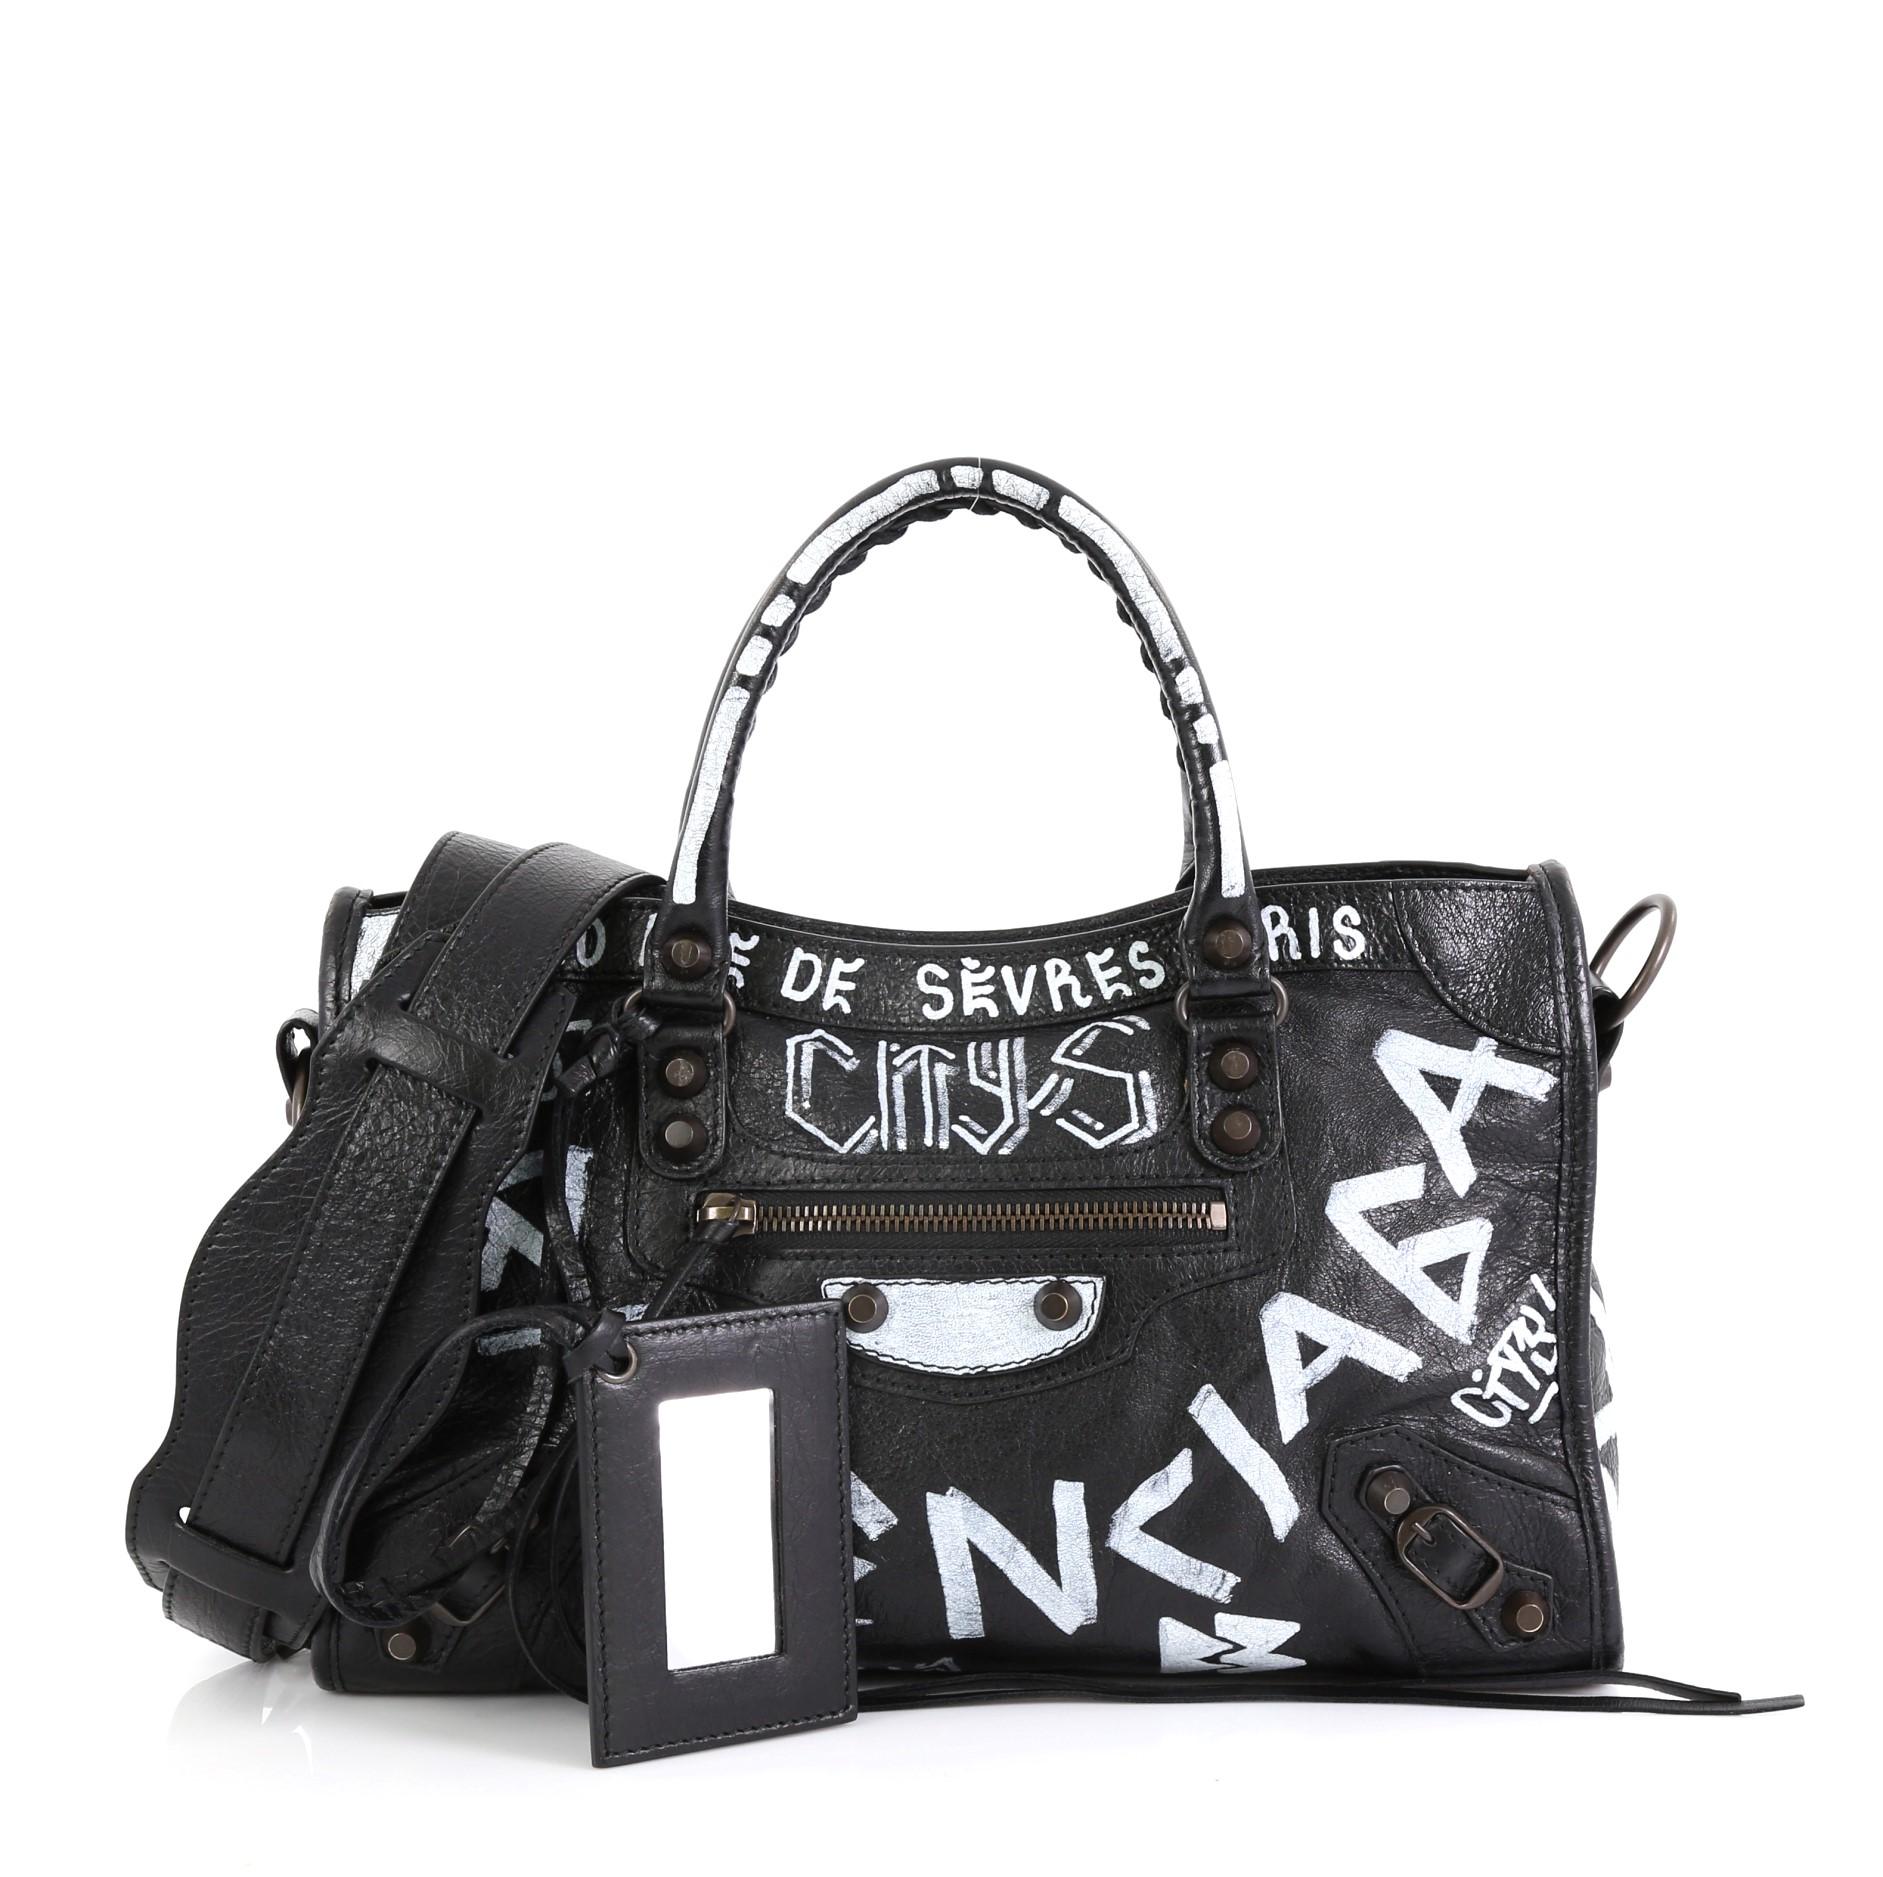 This Balenciaga City Graffiti Classic Studs Bag Leather Small, crafted from black leather, features dual braided woven handles, front zip pocket, printed graffiti writing, and brass-tone hardware. Its top zip closure opens to a black fabric interior